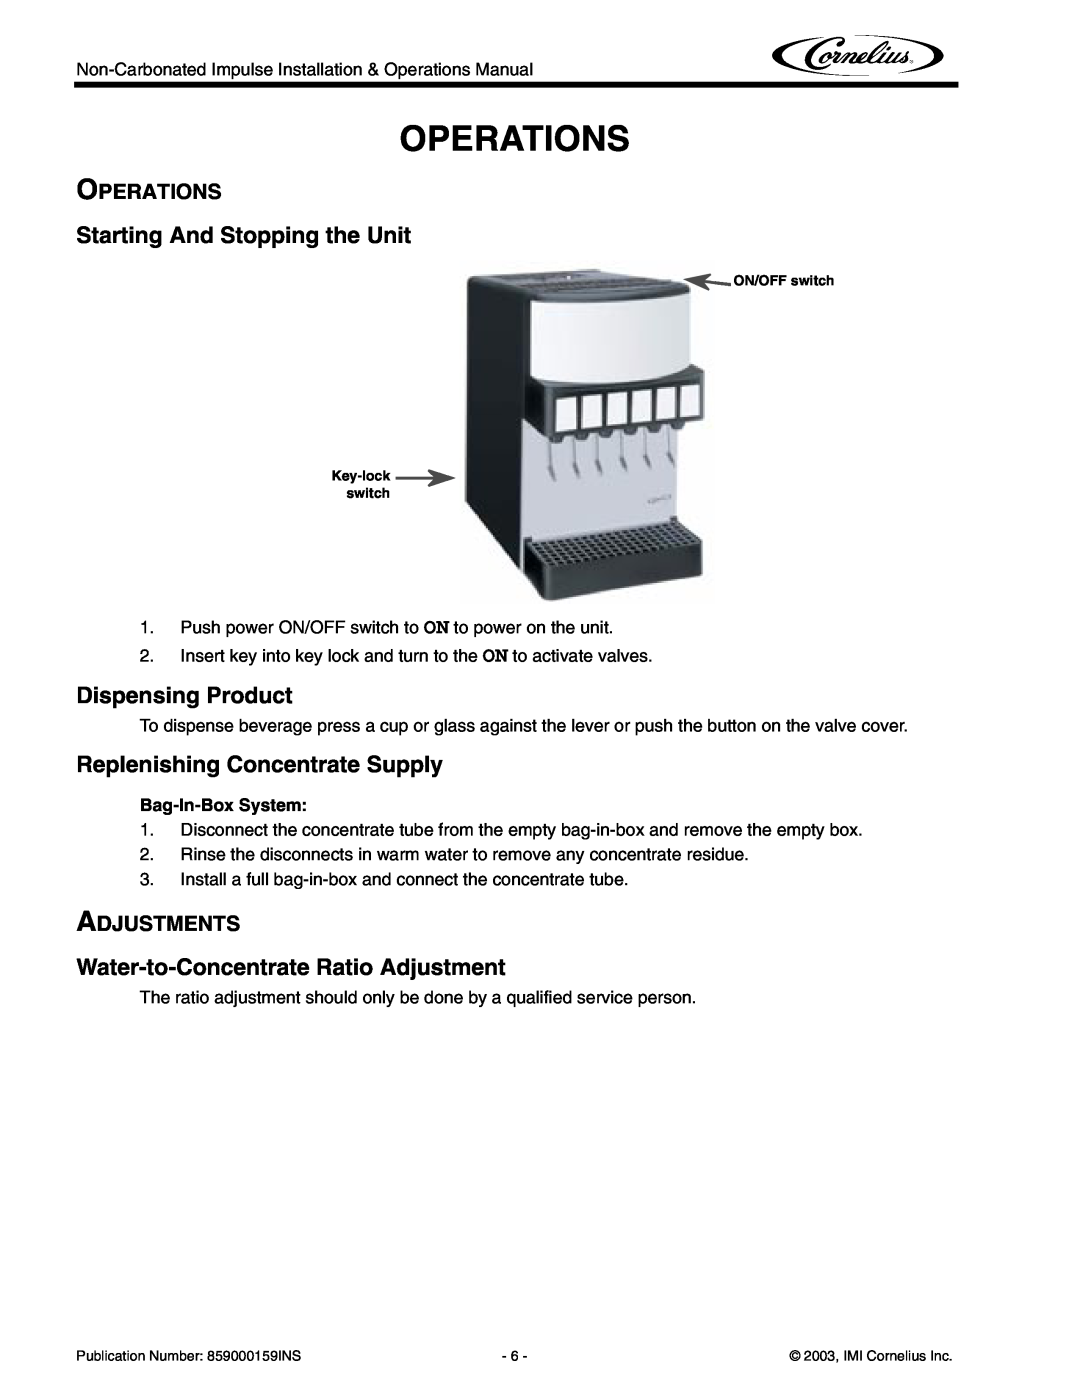 Cornelius Non-Carbonated Post-Mix Beverage Dispenser Operations, Starting And Stopping the Unit, Dispensing Product 